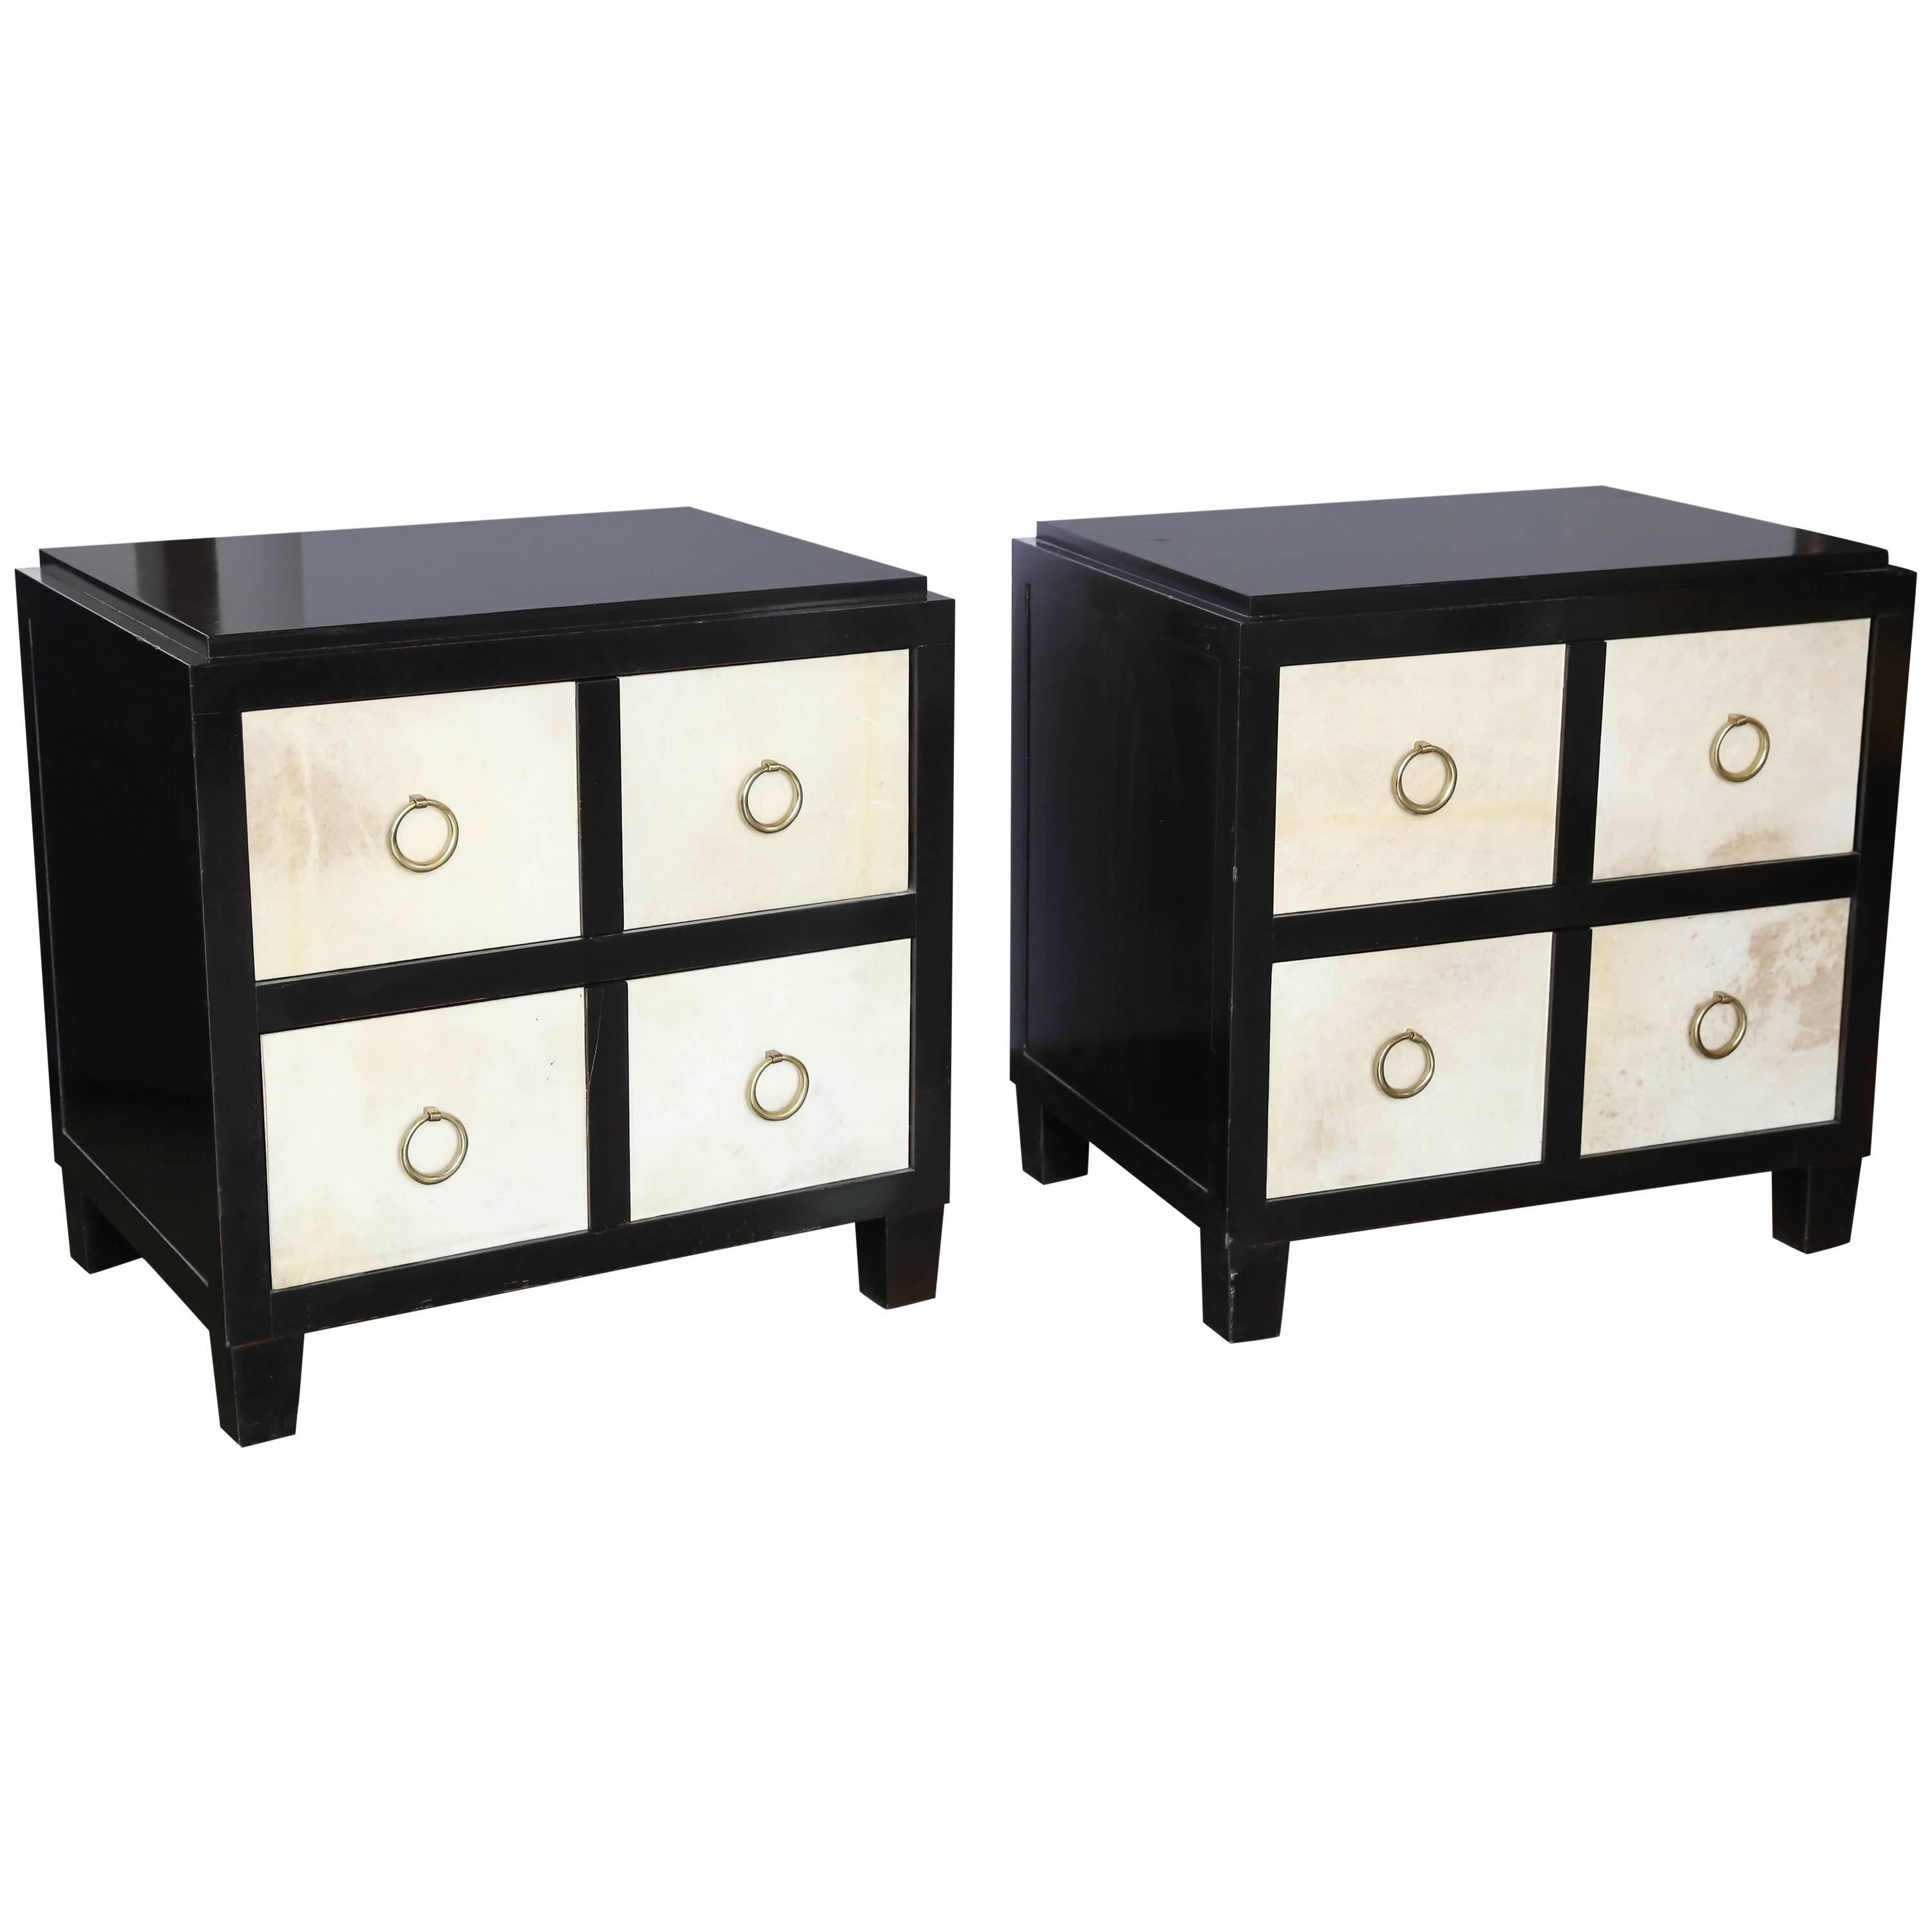 A Pair of French Moderne style Ebonized Wood and Vellum Bedside Cabinets